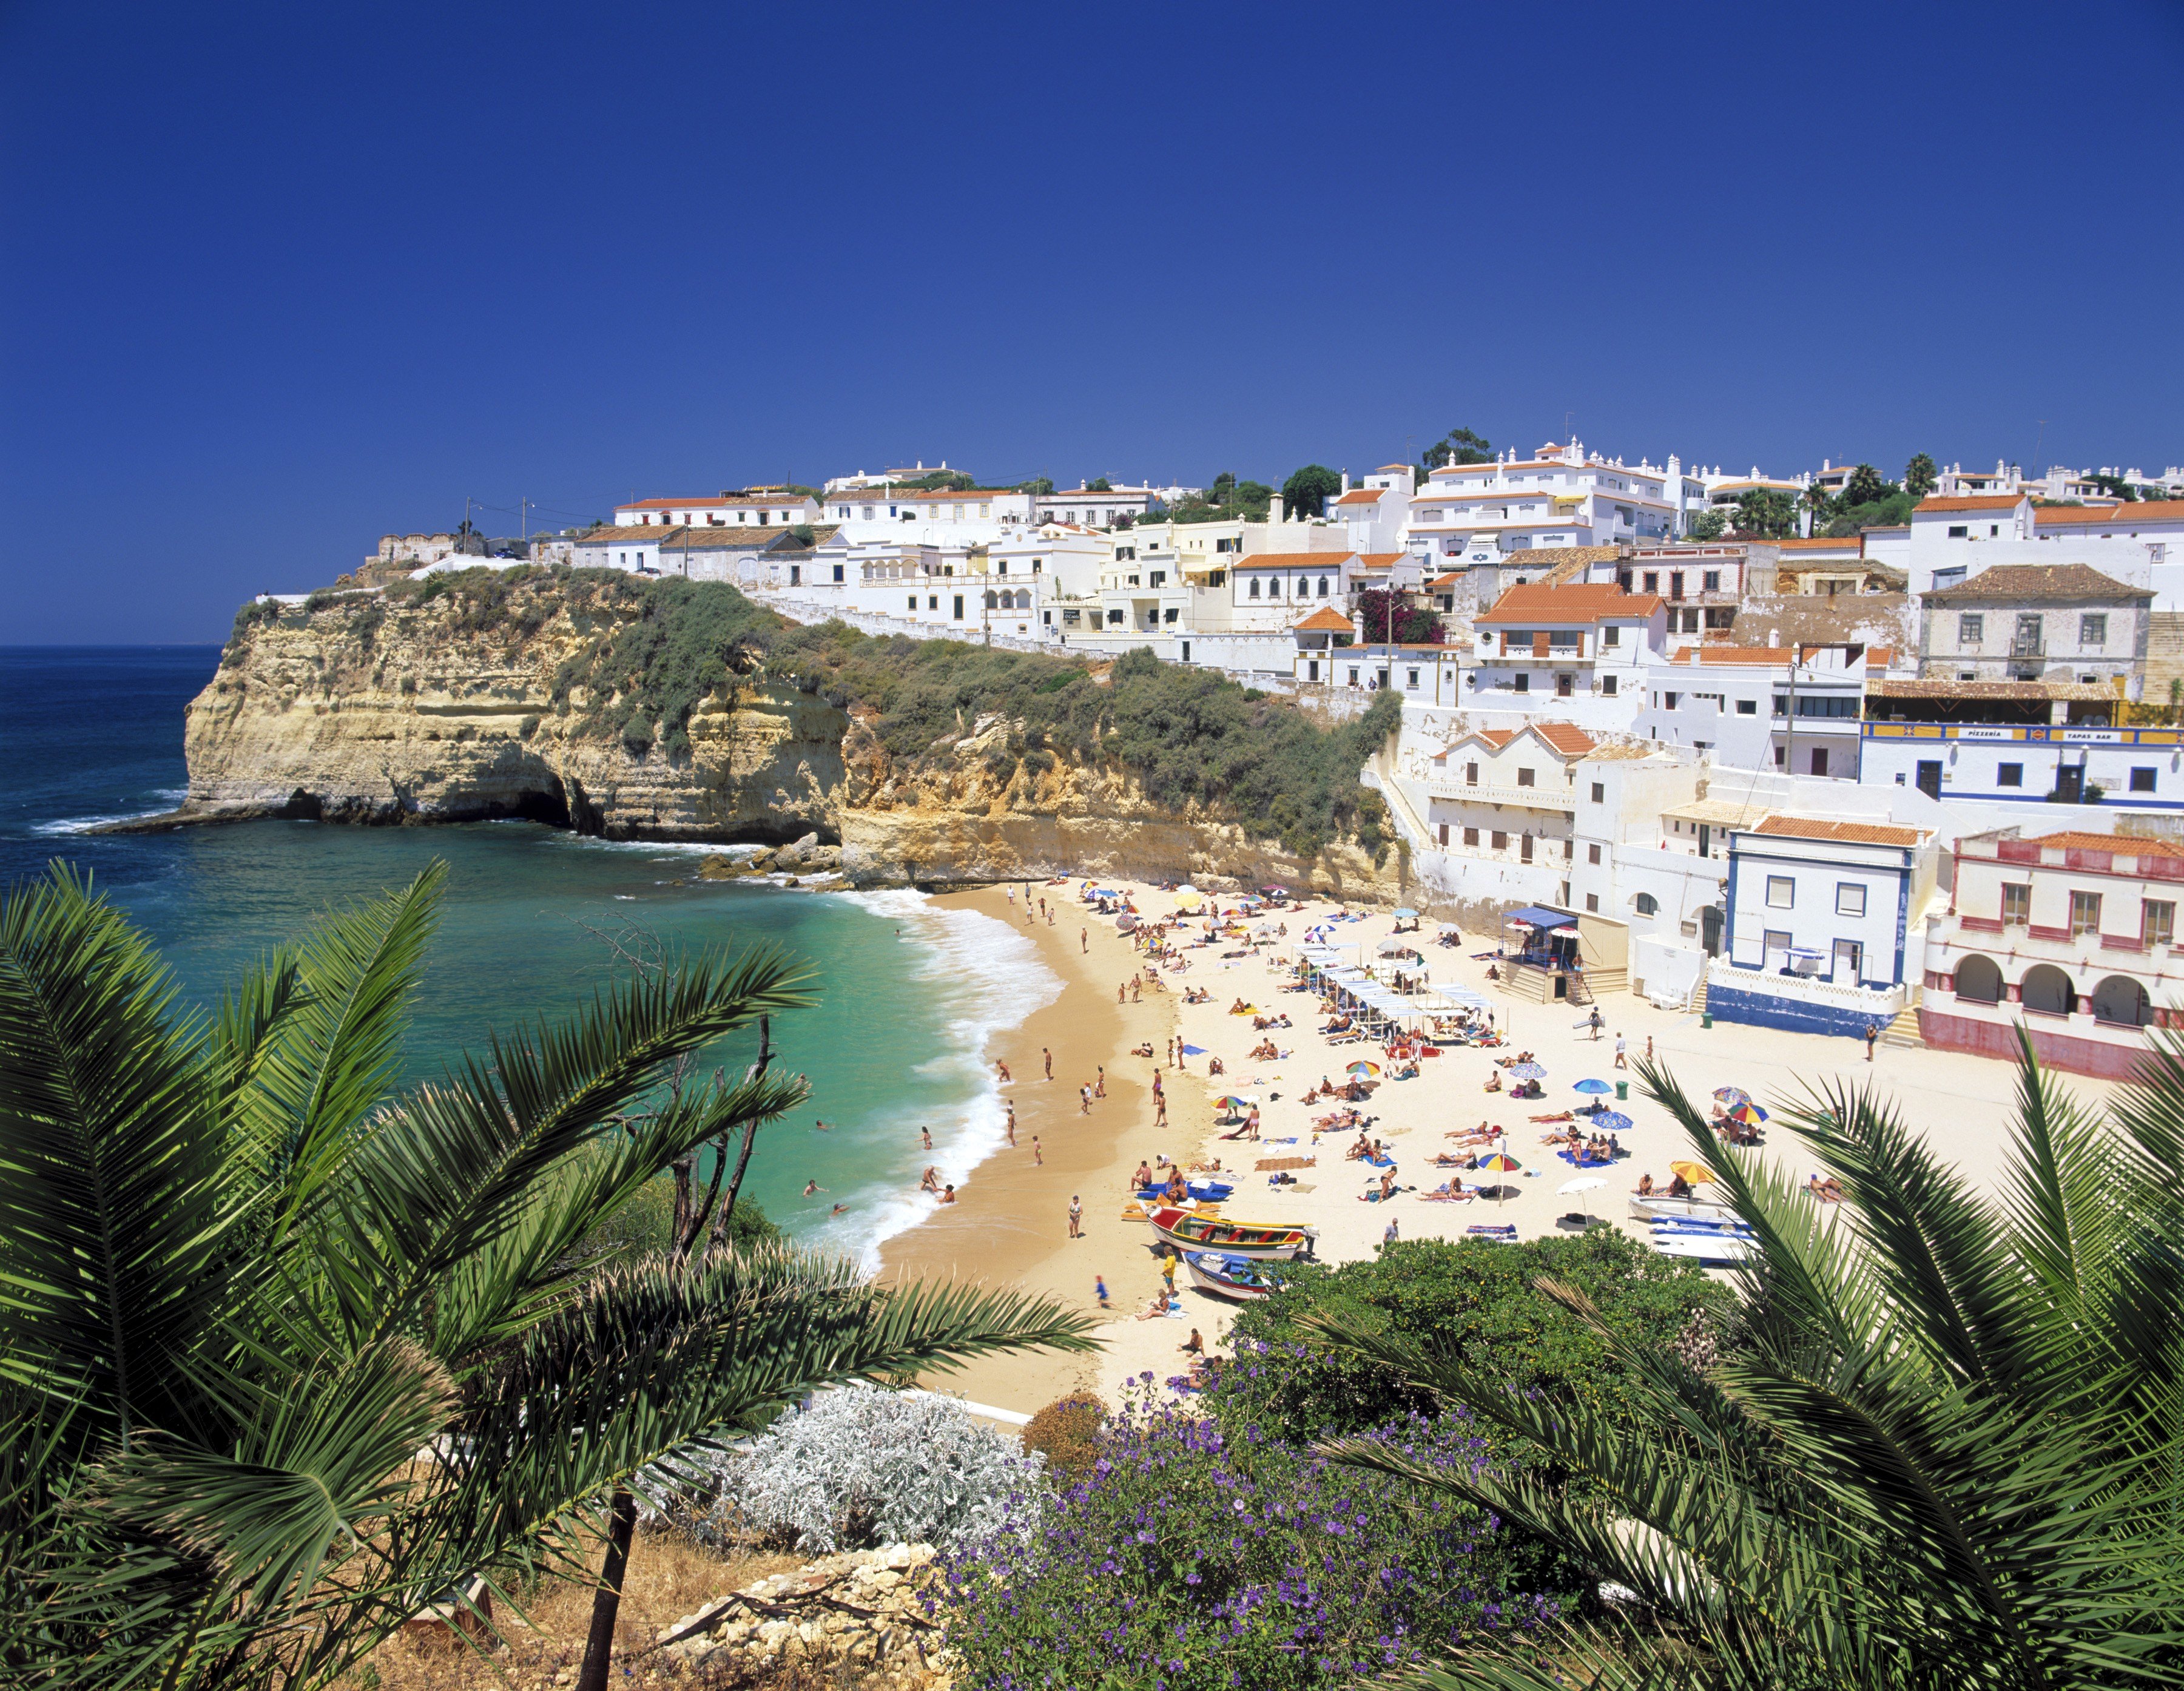 Mandatory Credit: The Travel Library / Rex Features Ltd. VIEW OF BEACH & TOWN, CARVOEIRO, ALGARVE, PORTUGAL VARIOUS